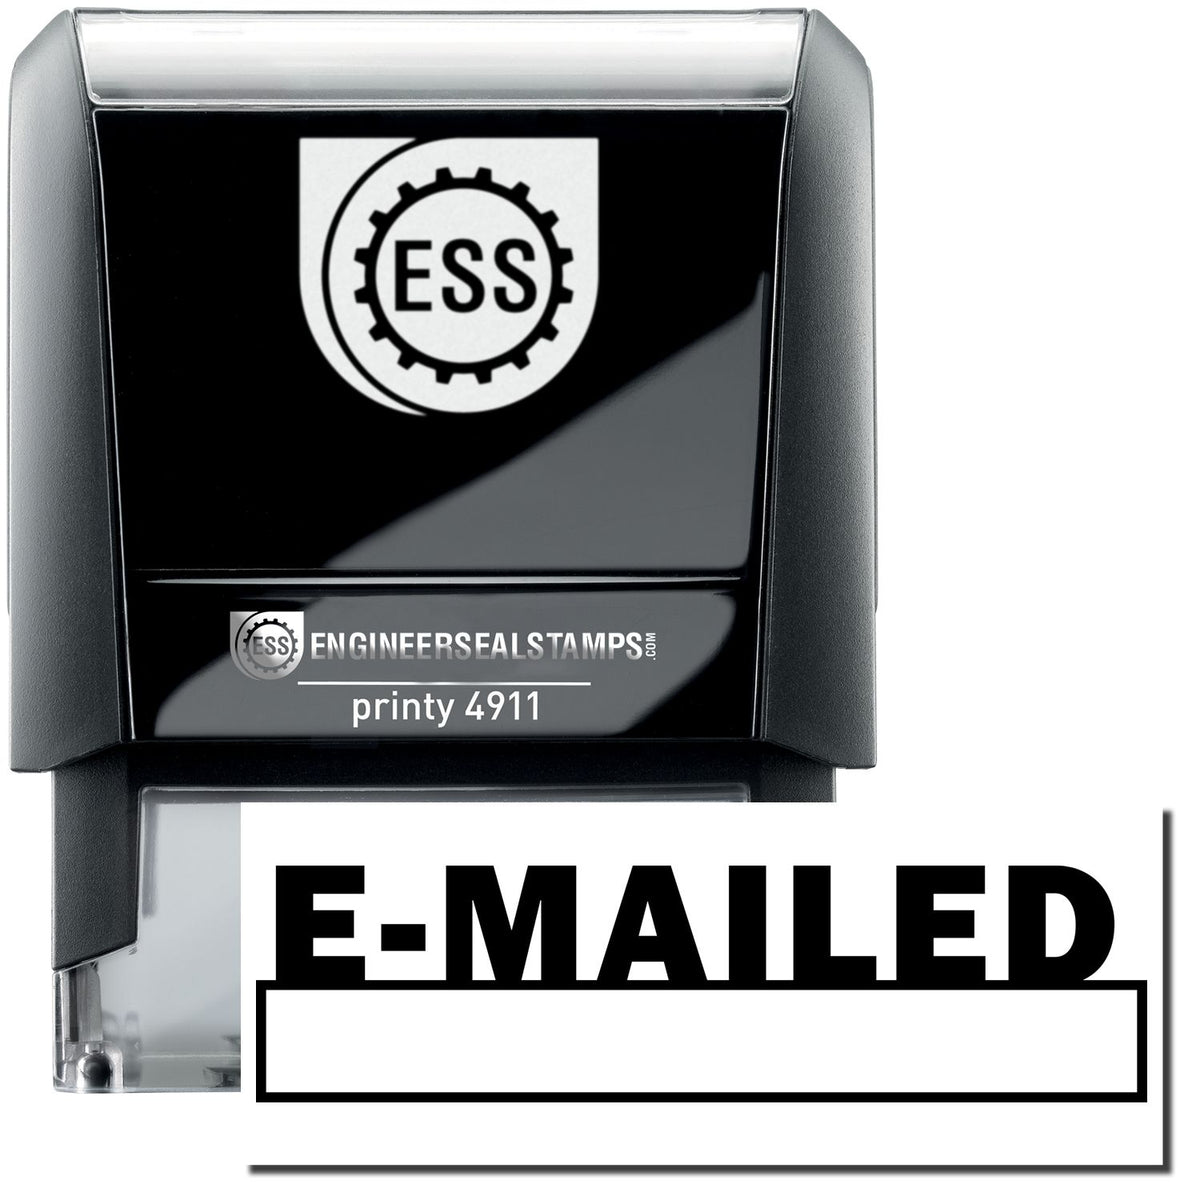 A self-inking stamp with a stamped image showing how the text &quot;E-MAILED&quot; with a date box under it is displayed after stamping.